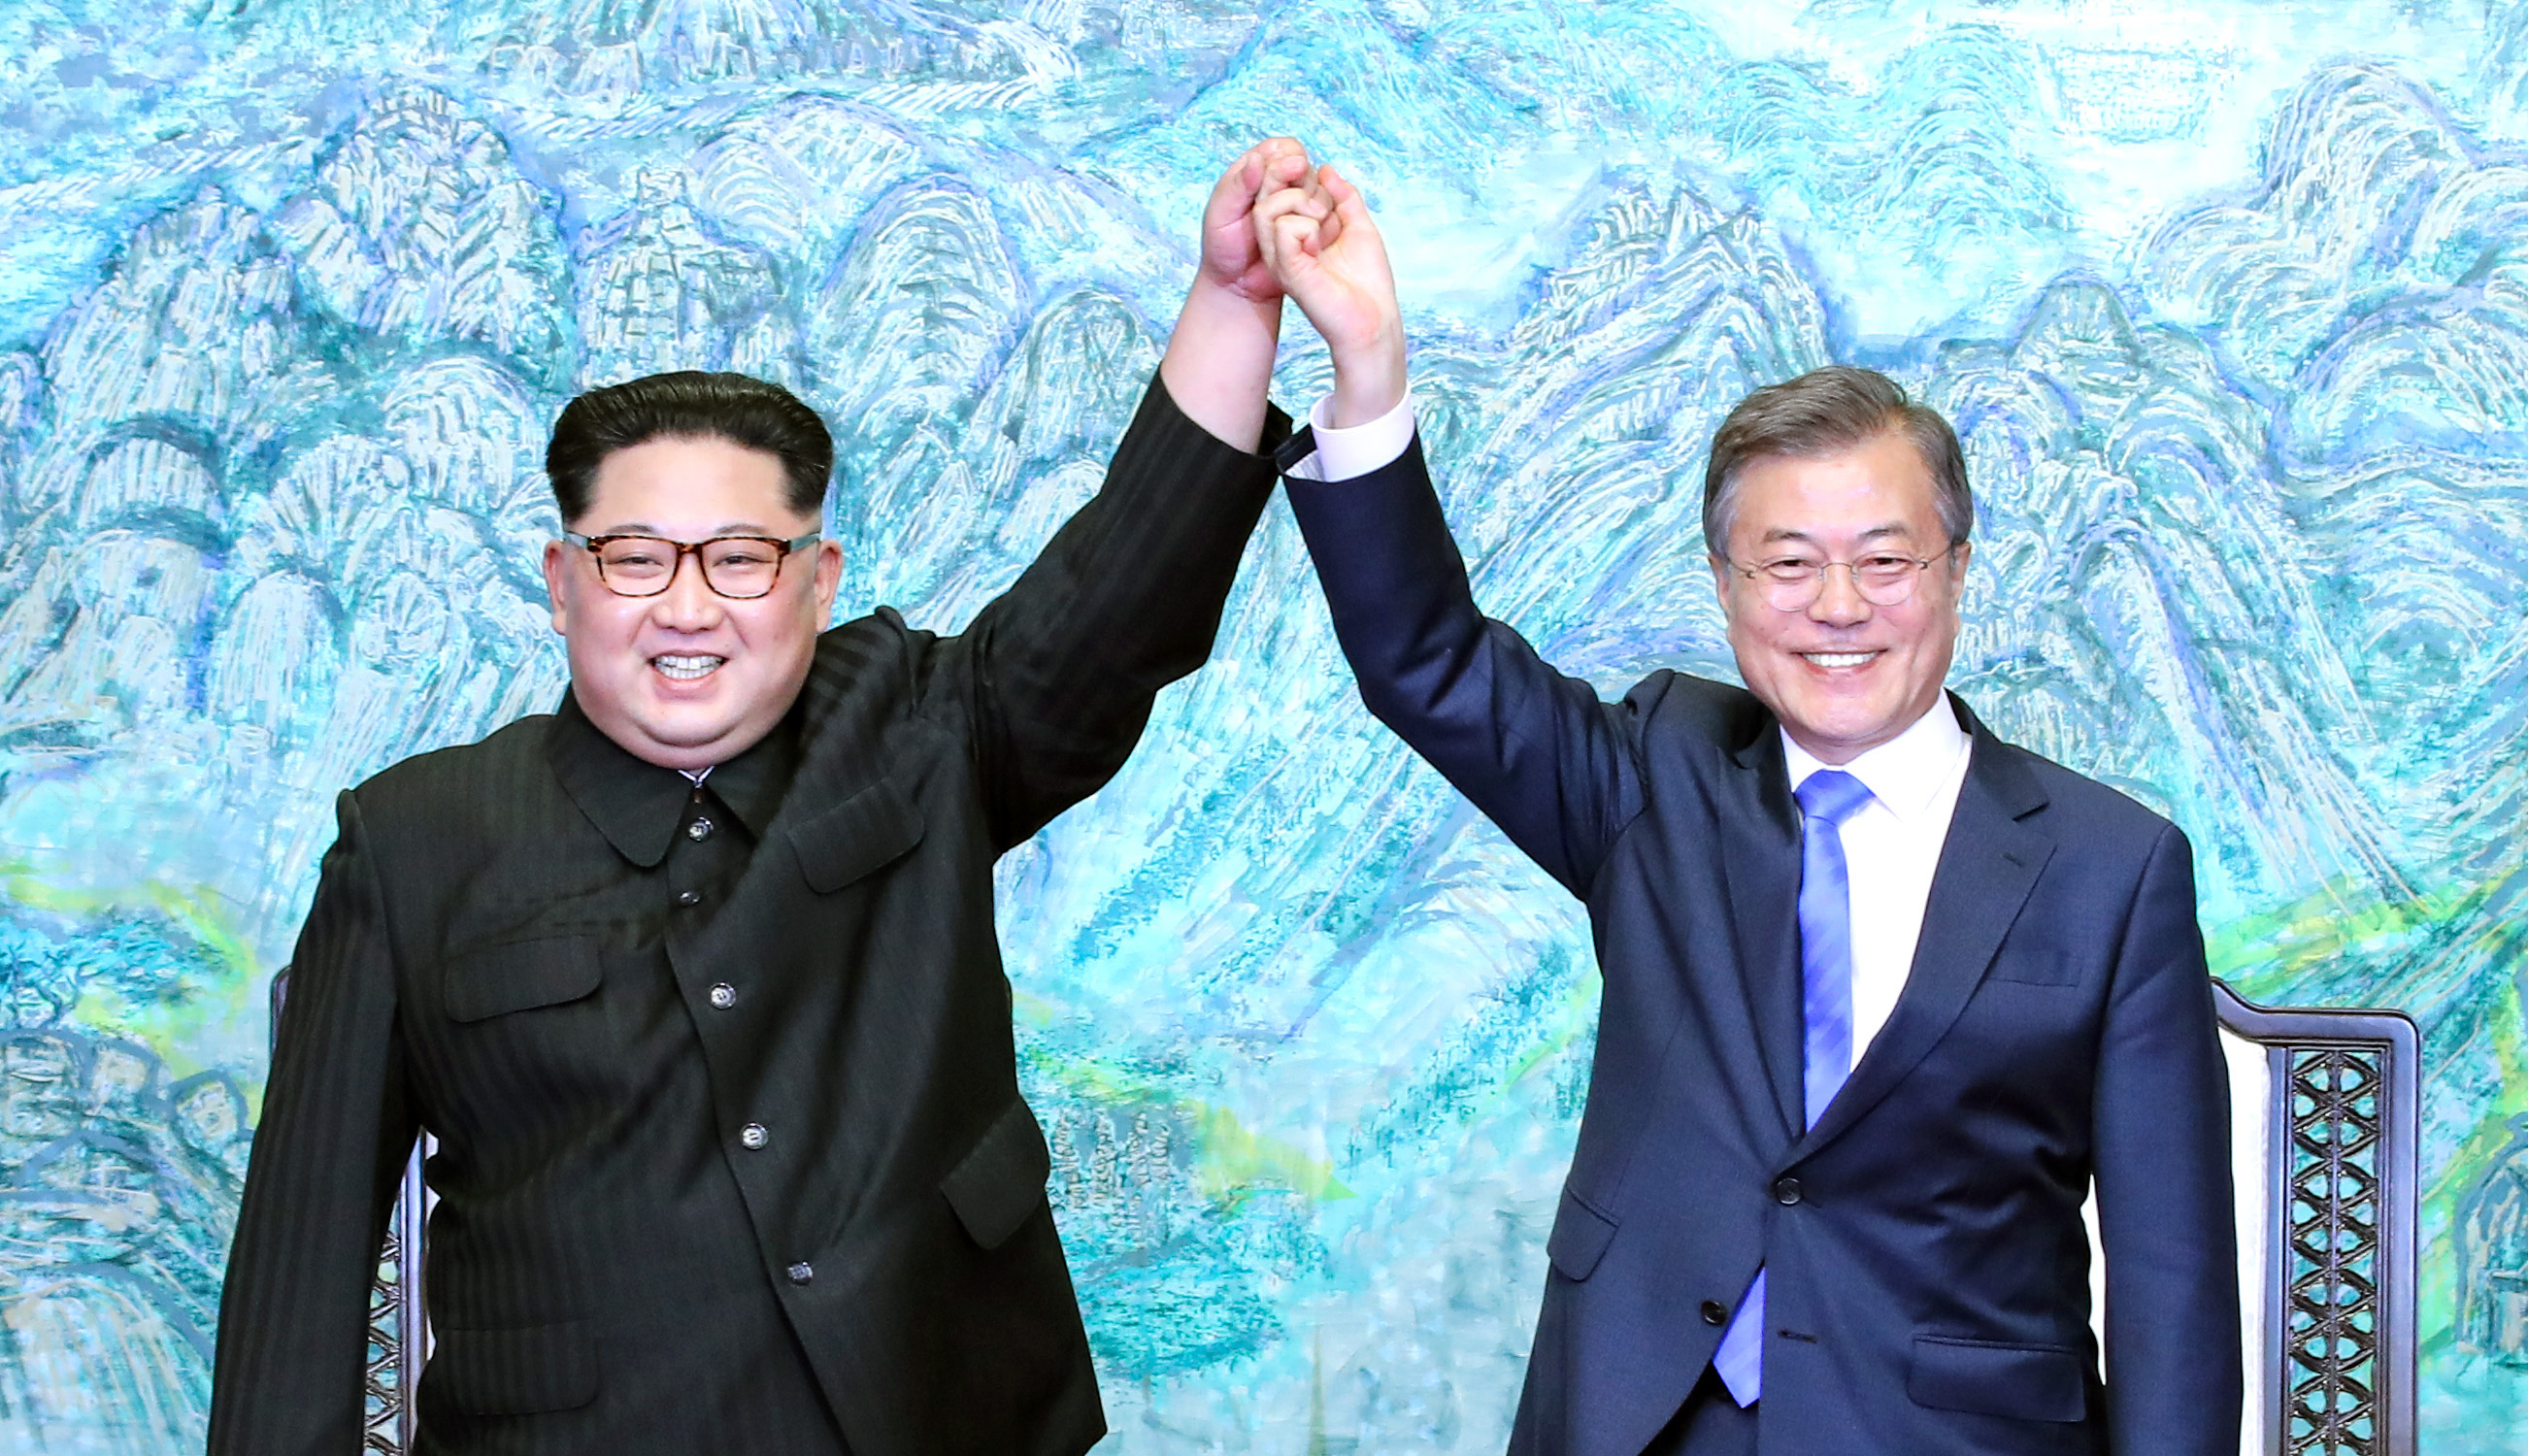 North Korean leader Kim Jong Un and South Korean President Moon Jae-in during the Inter-Korean Summit at the Peace House on April 27, 2018 in Panmunjom, South Korea. (Korea Summit Press PoolGetty Images)